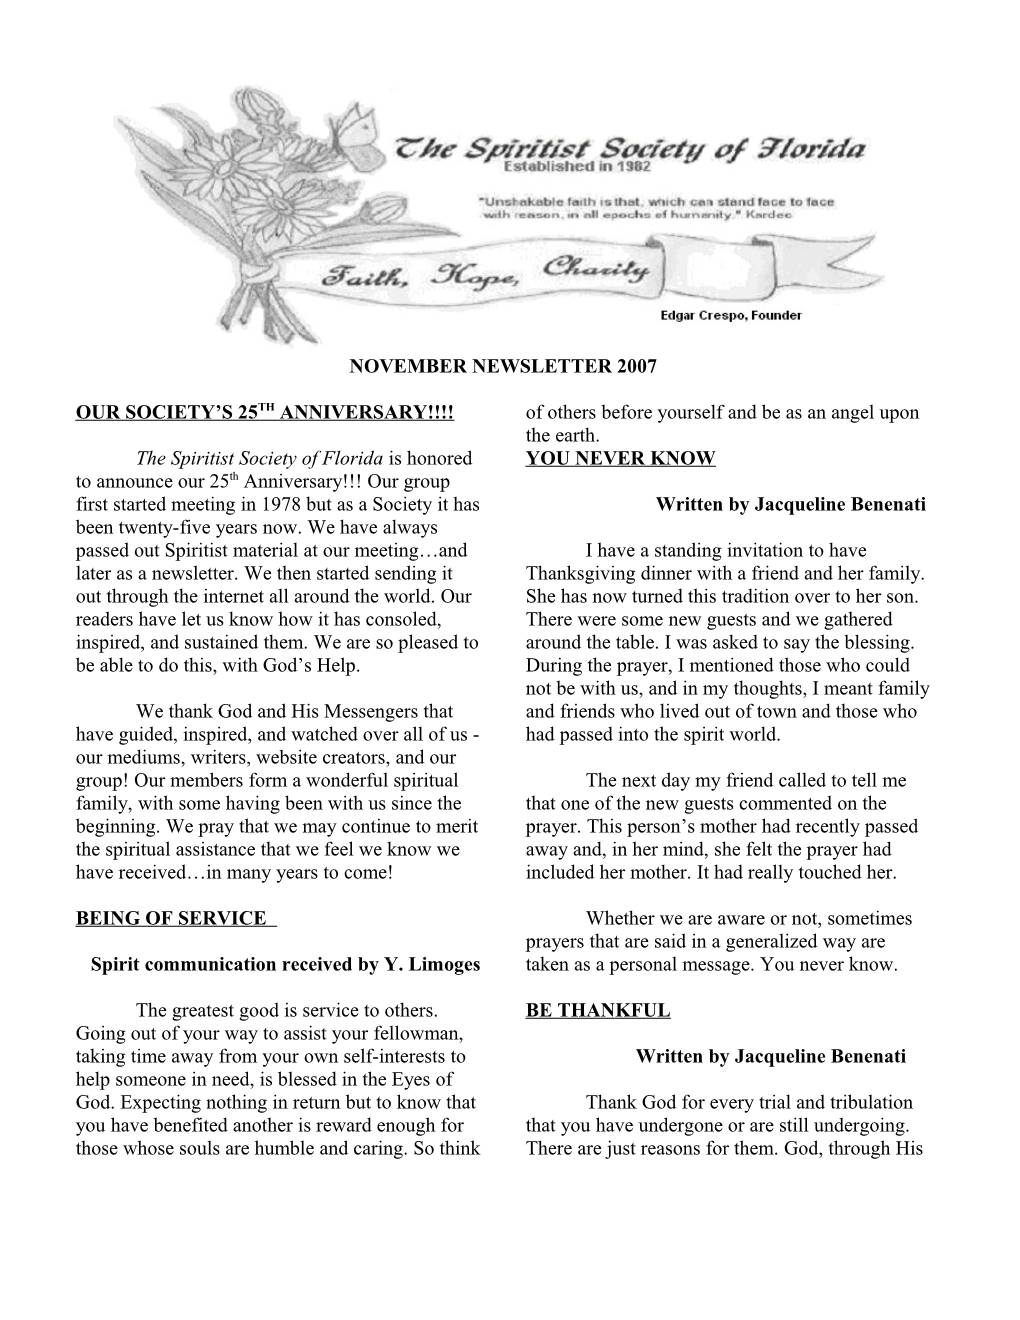 The Spiritist Society of Florida, May Newsletter 2006